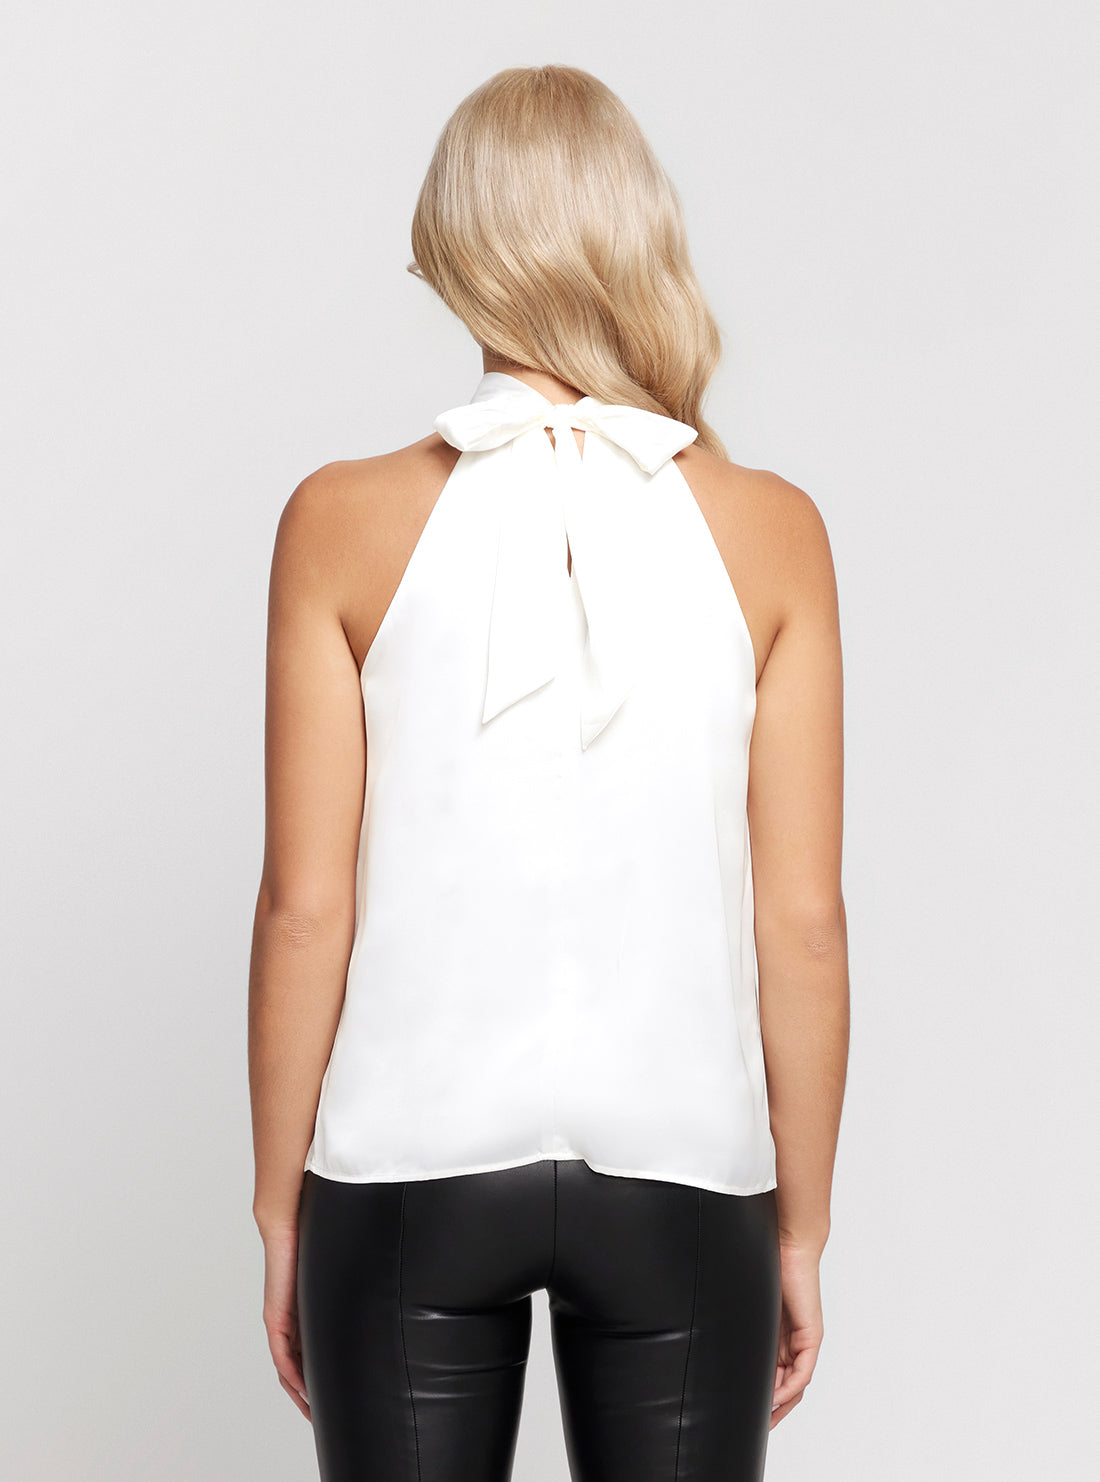 GUESS Marciano White Erika Halter Neck Top back view